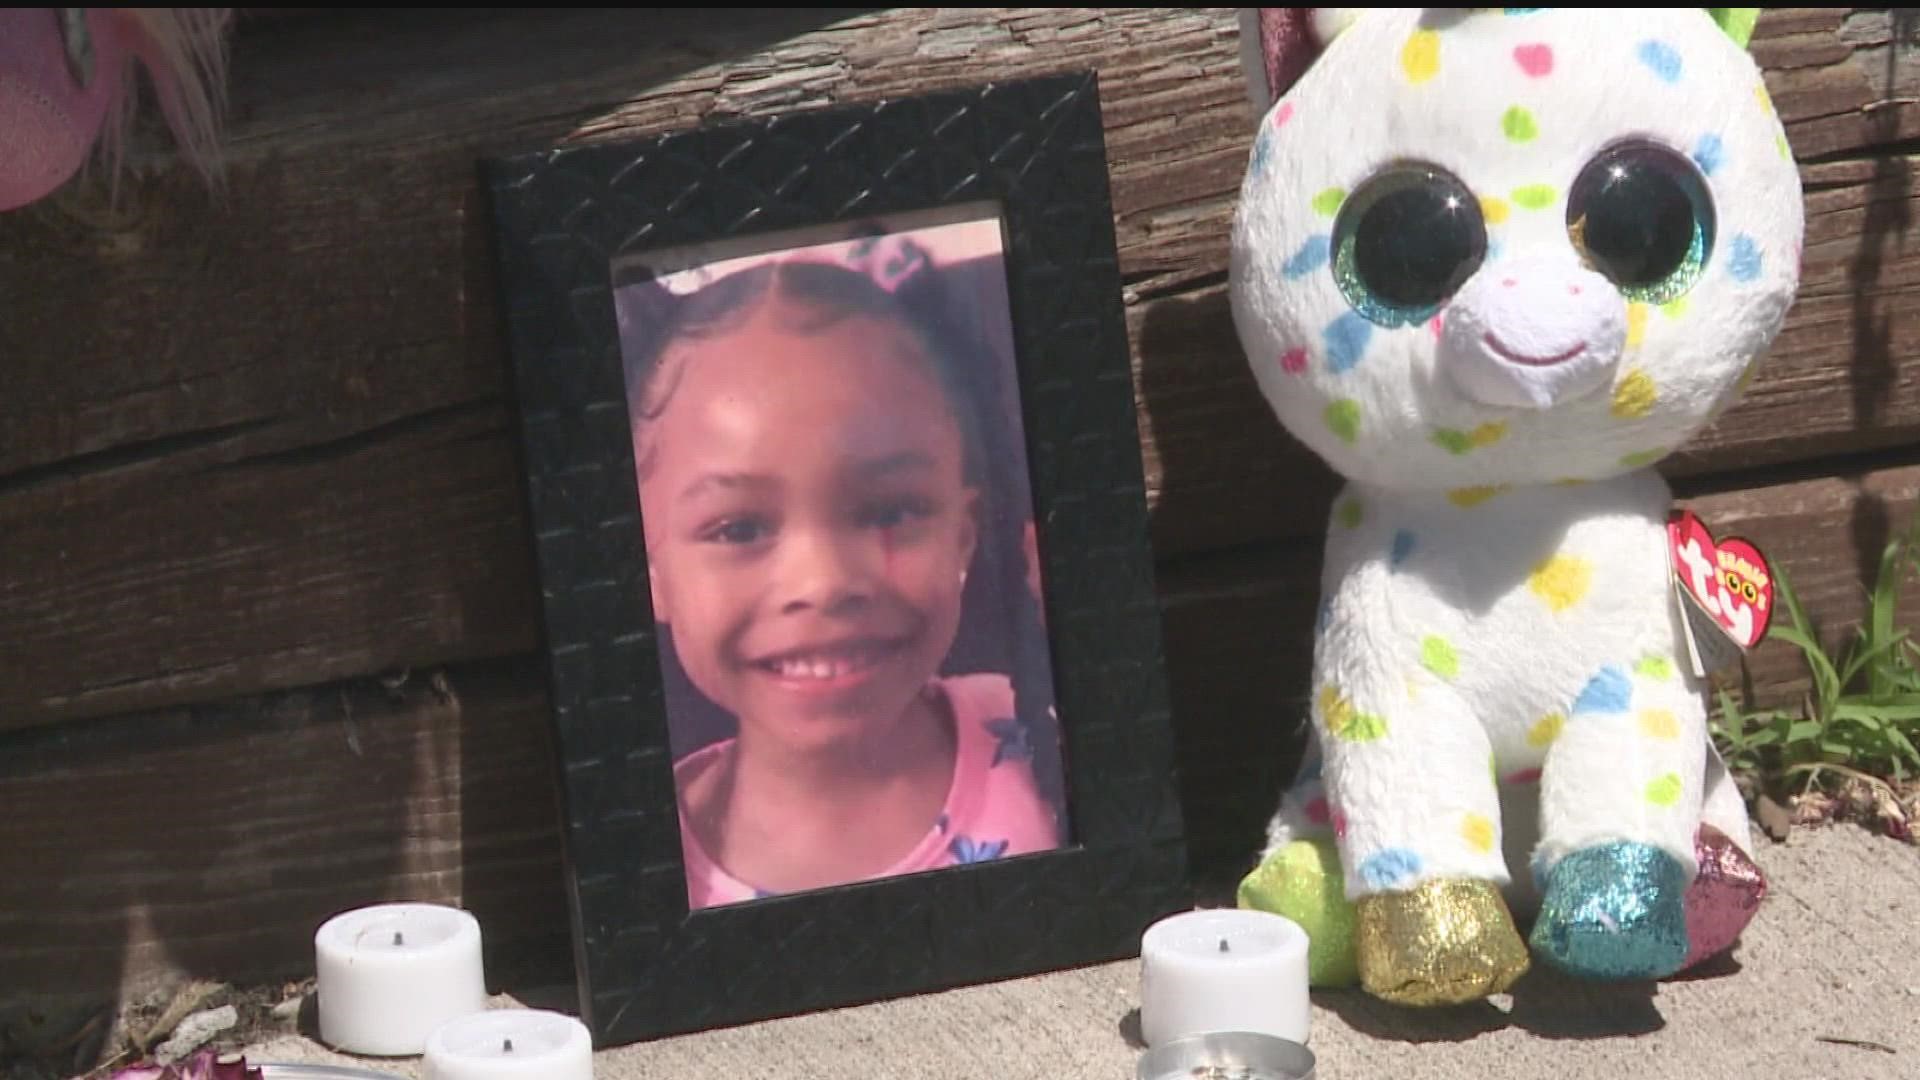 One man pleaded guilty and was sentenced in a case that allegedly involved a gun also used in the shooting that killed the 6-year-old.